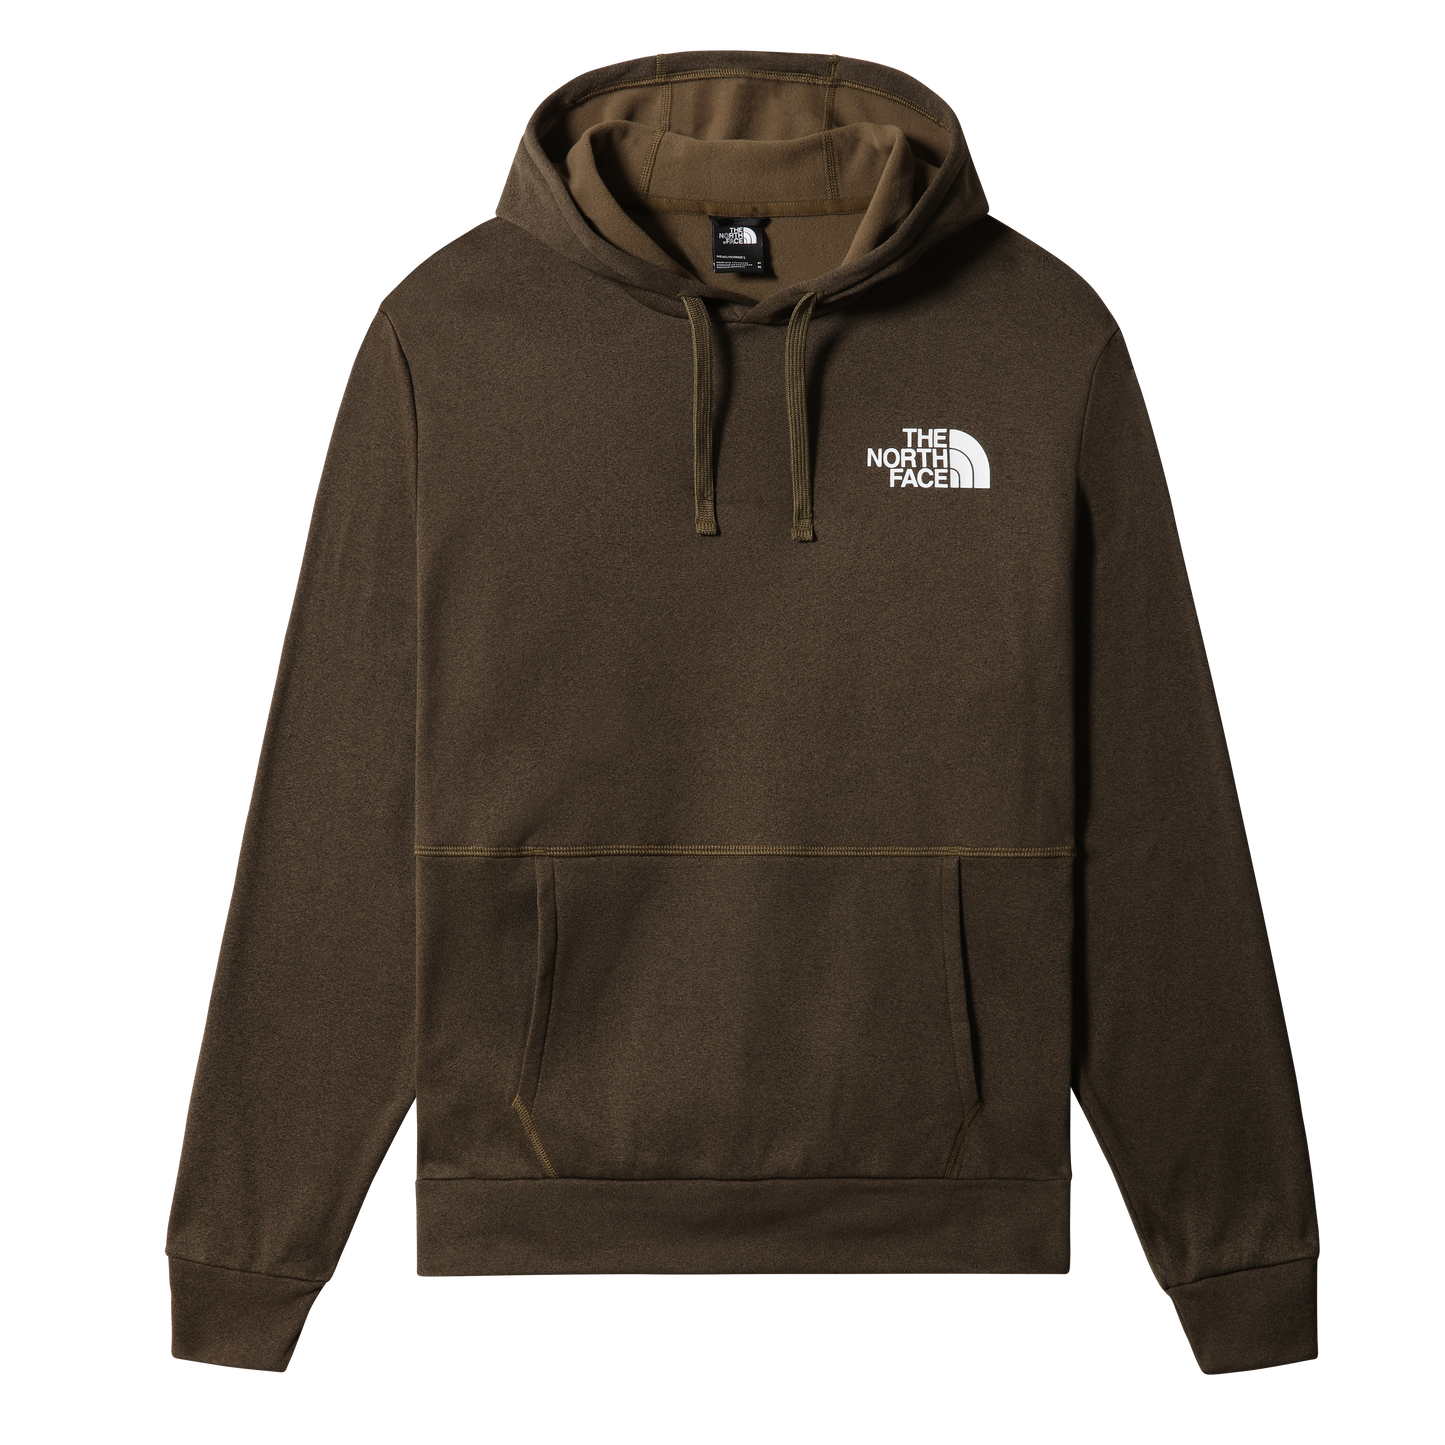 The North Face Explorer Fleece Pullover Hoodie